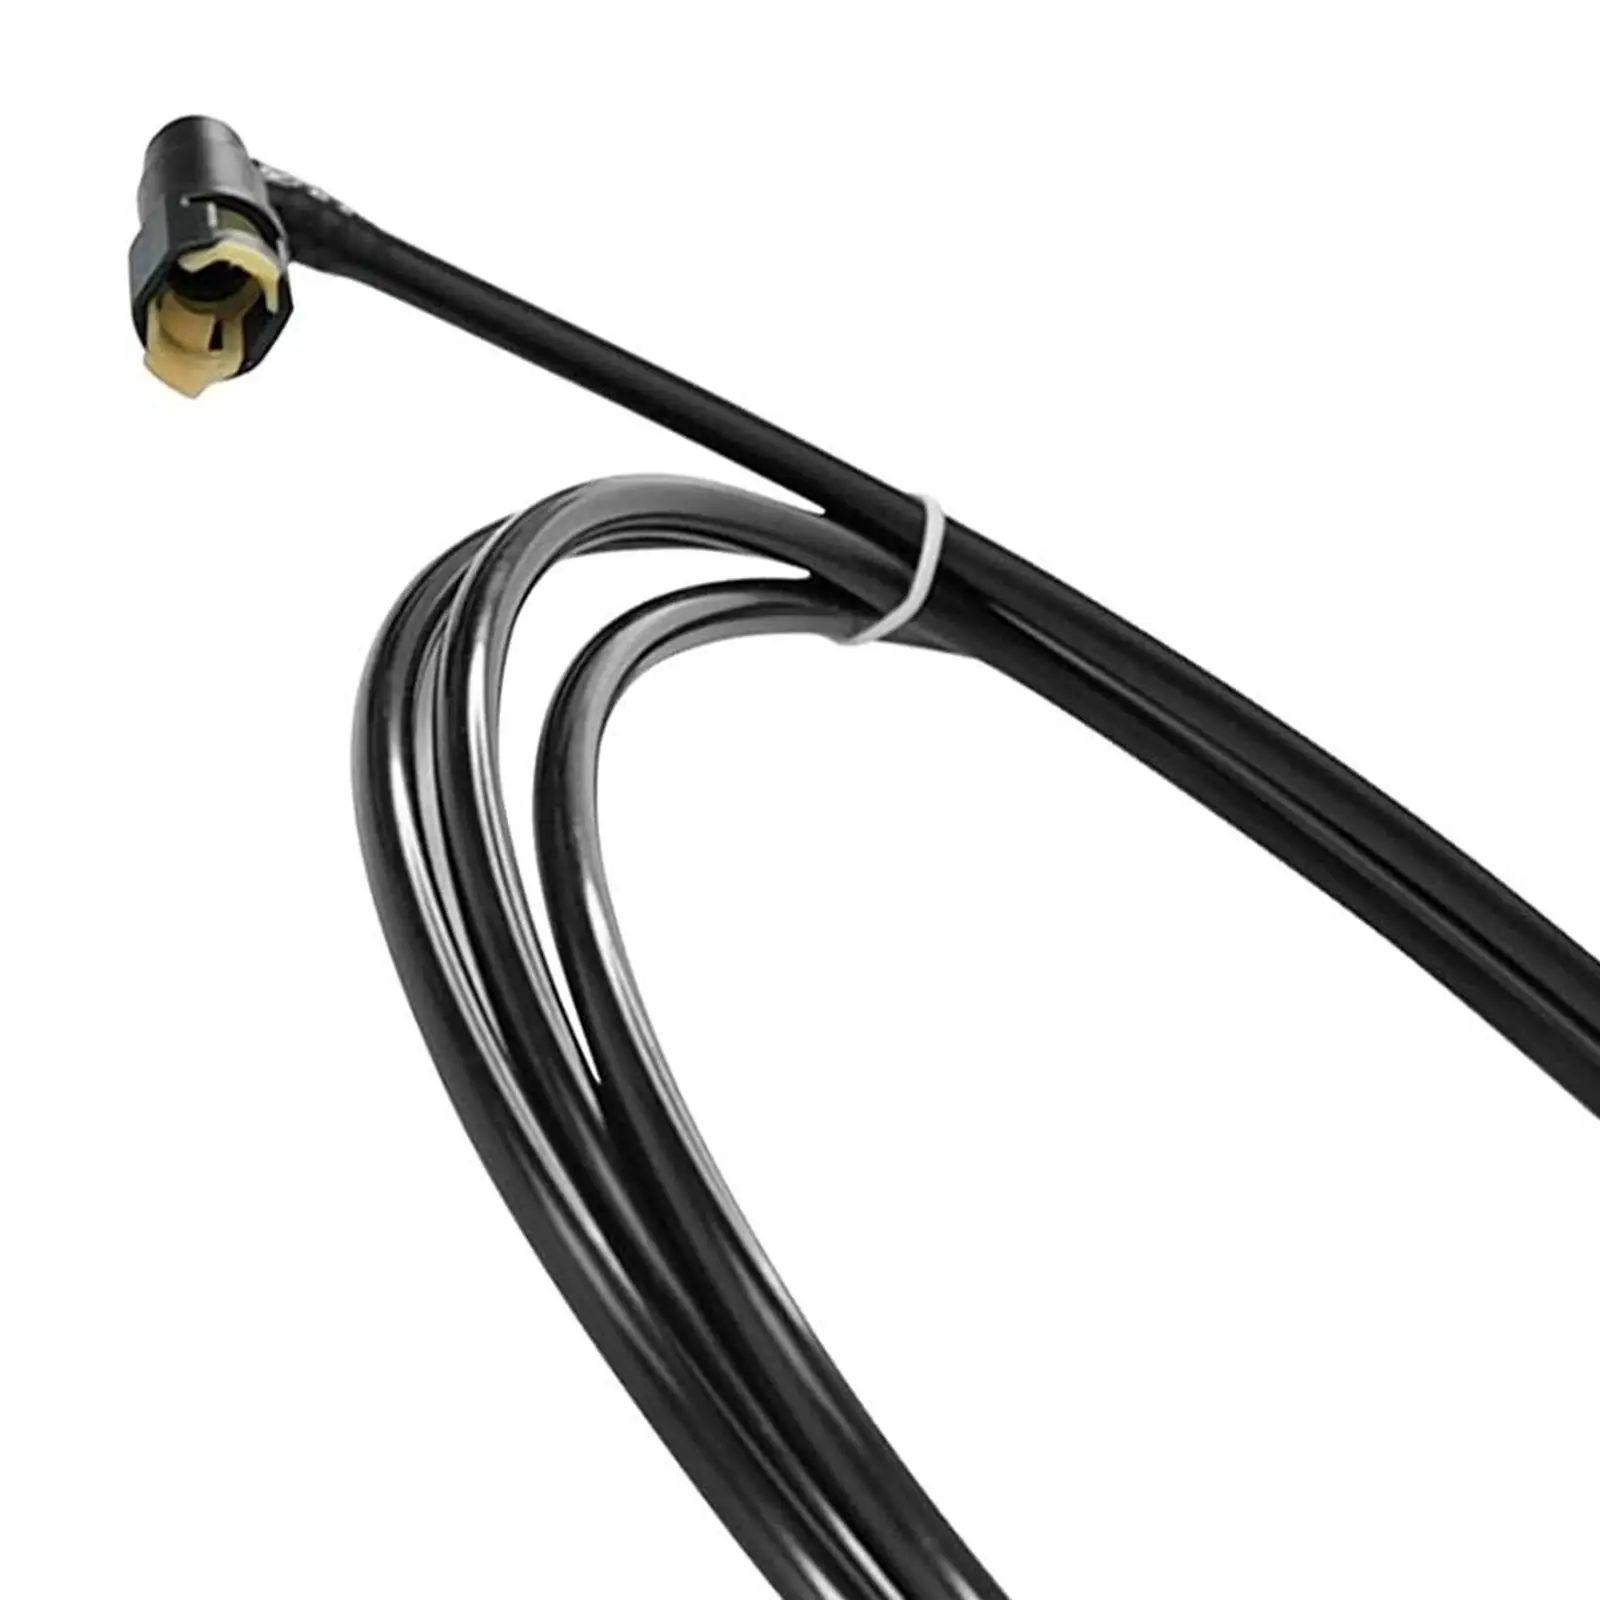 Pick up Gas Fuel Line Fl-Fg0212 Replaces Durable High Performance Car